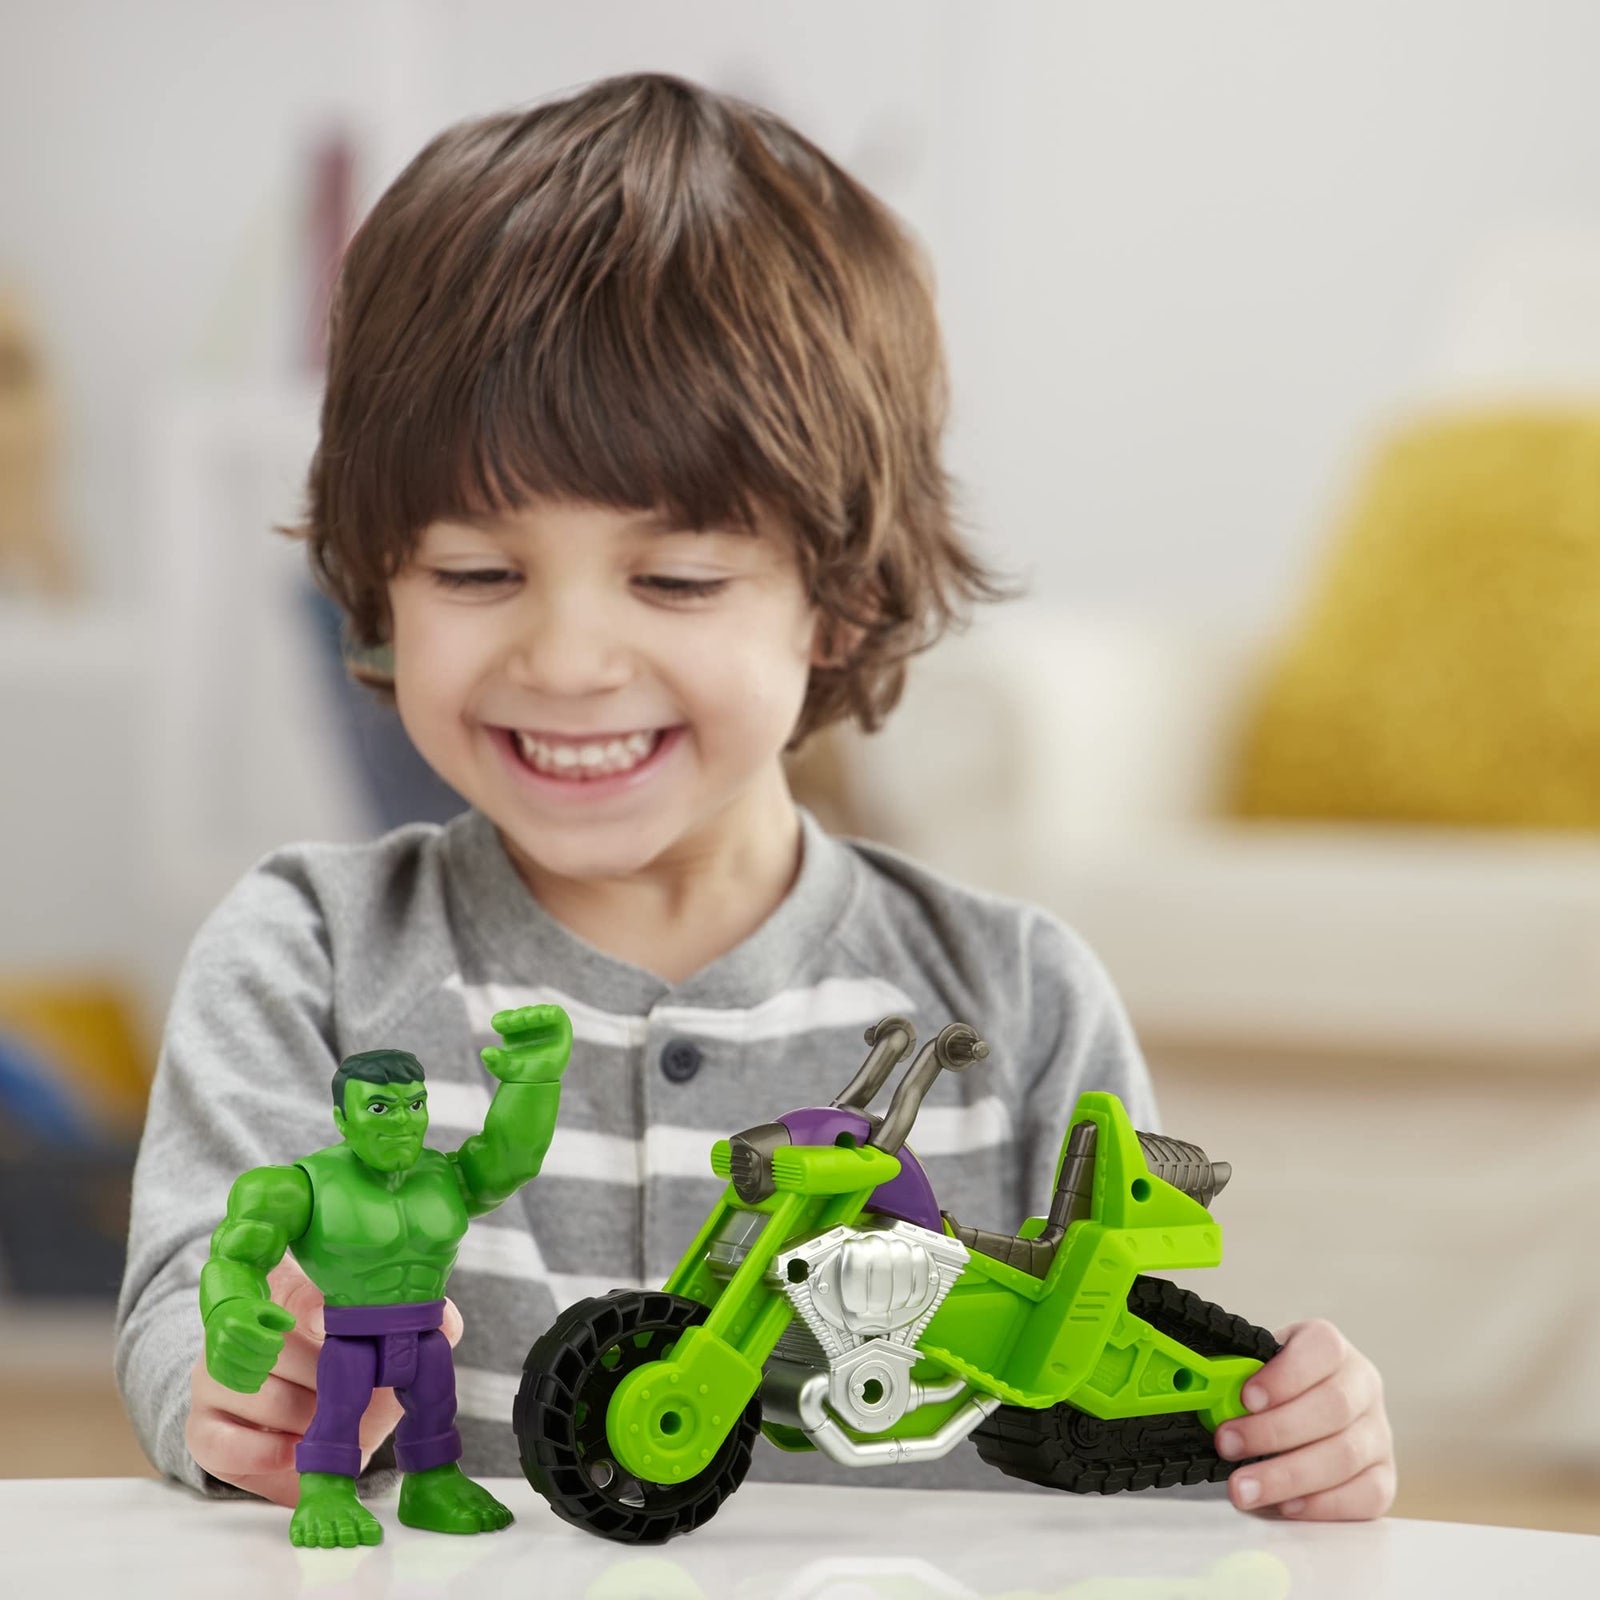 Super Hero Adventures Playskool Heroes Marvel Hulk Smash Tank, 5-Inch Figure and Motorcycle Set, Toys for Kids Ages 3 and Up